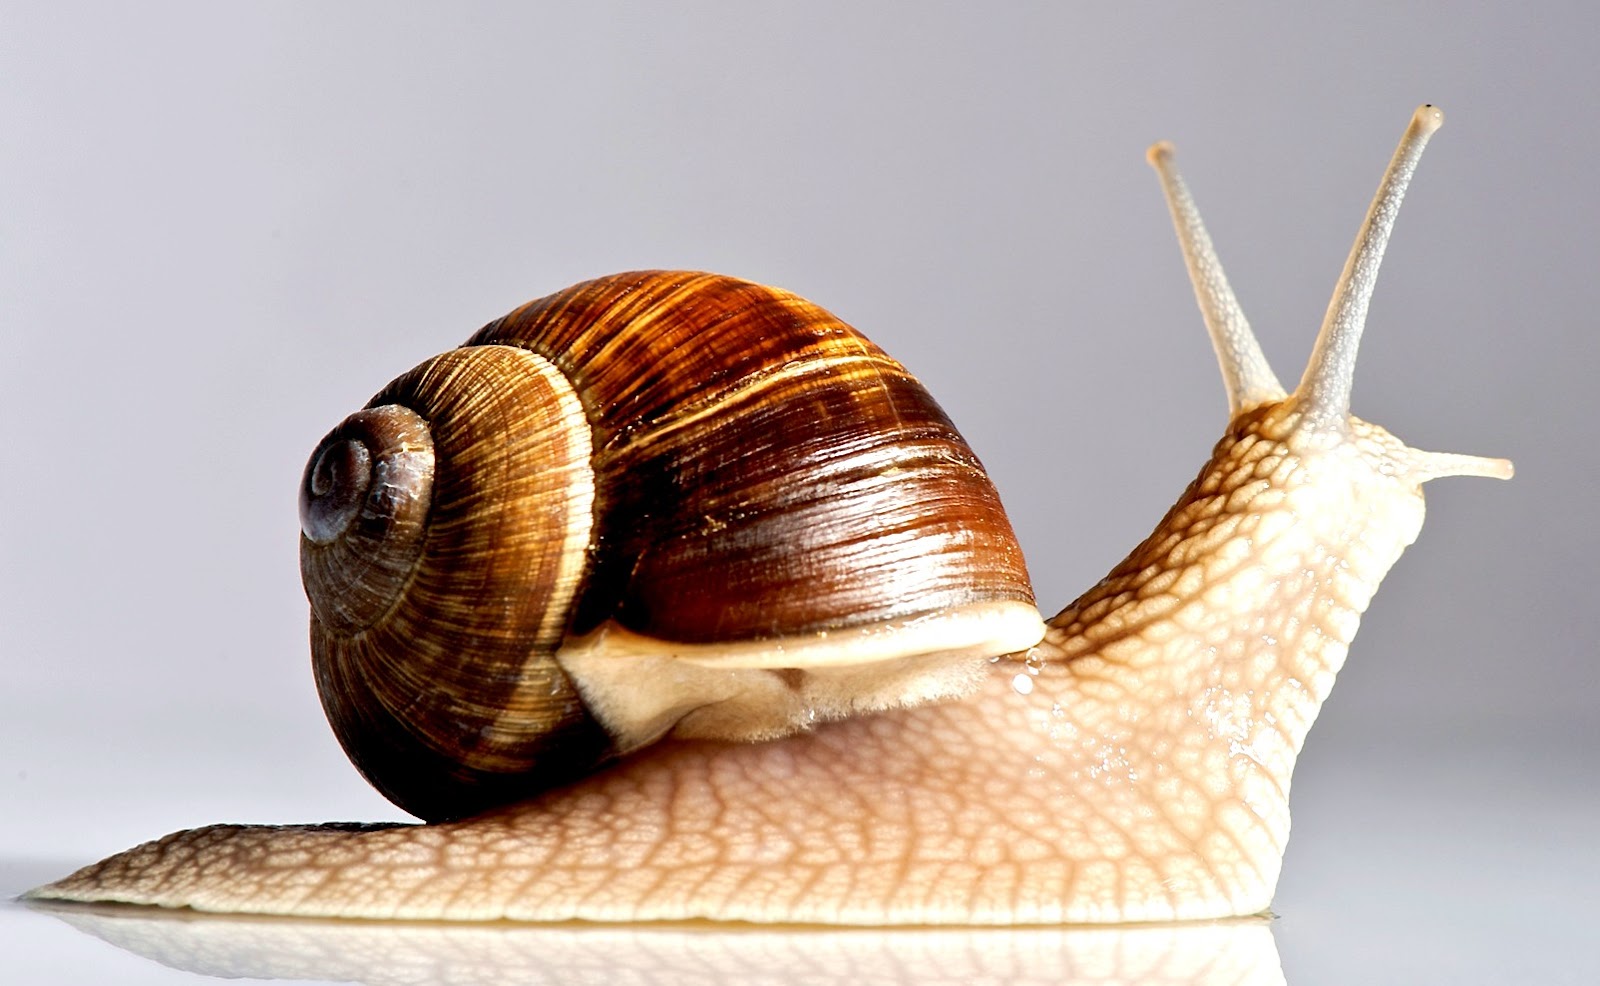 Snail Facts for Kids | LoveToKnow